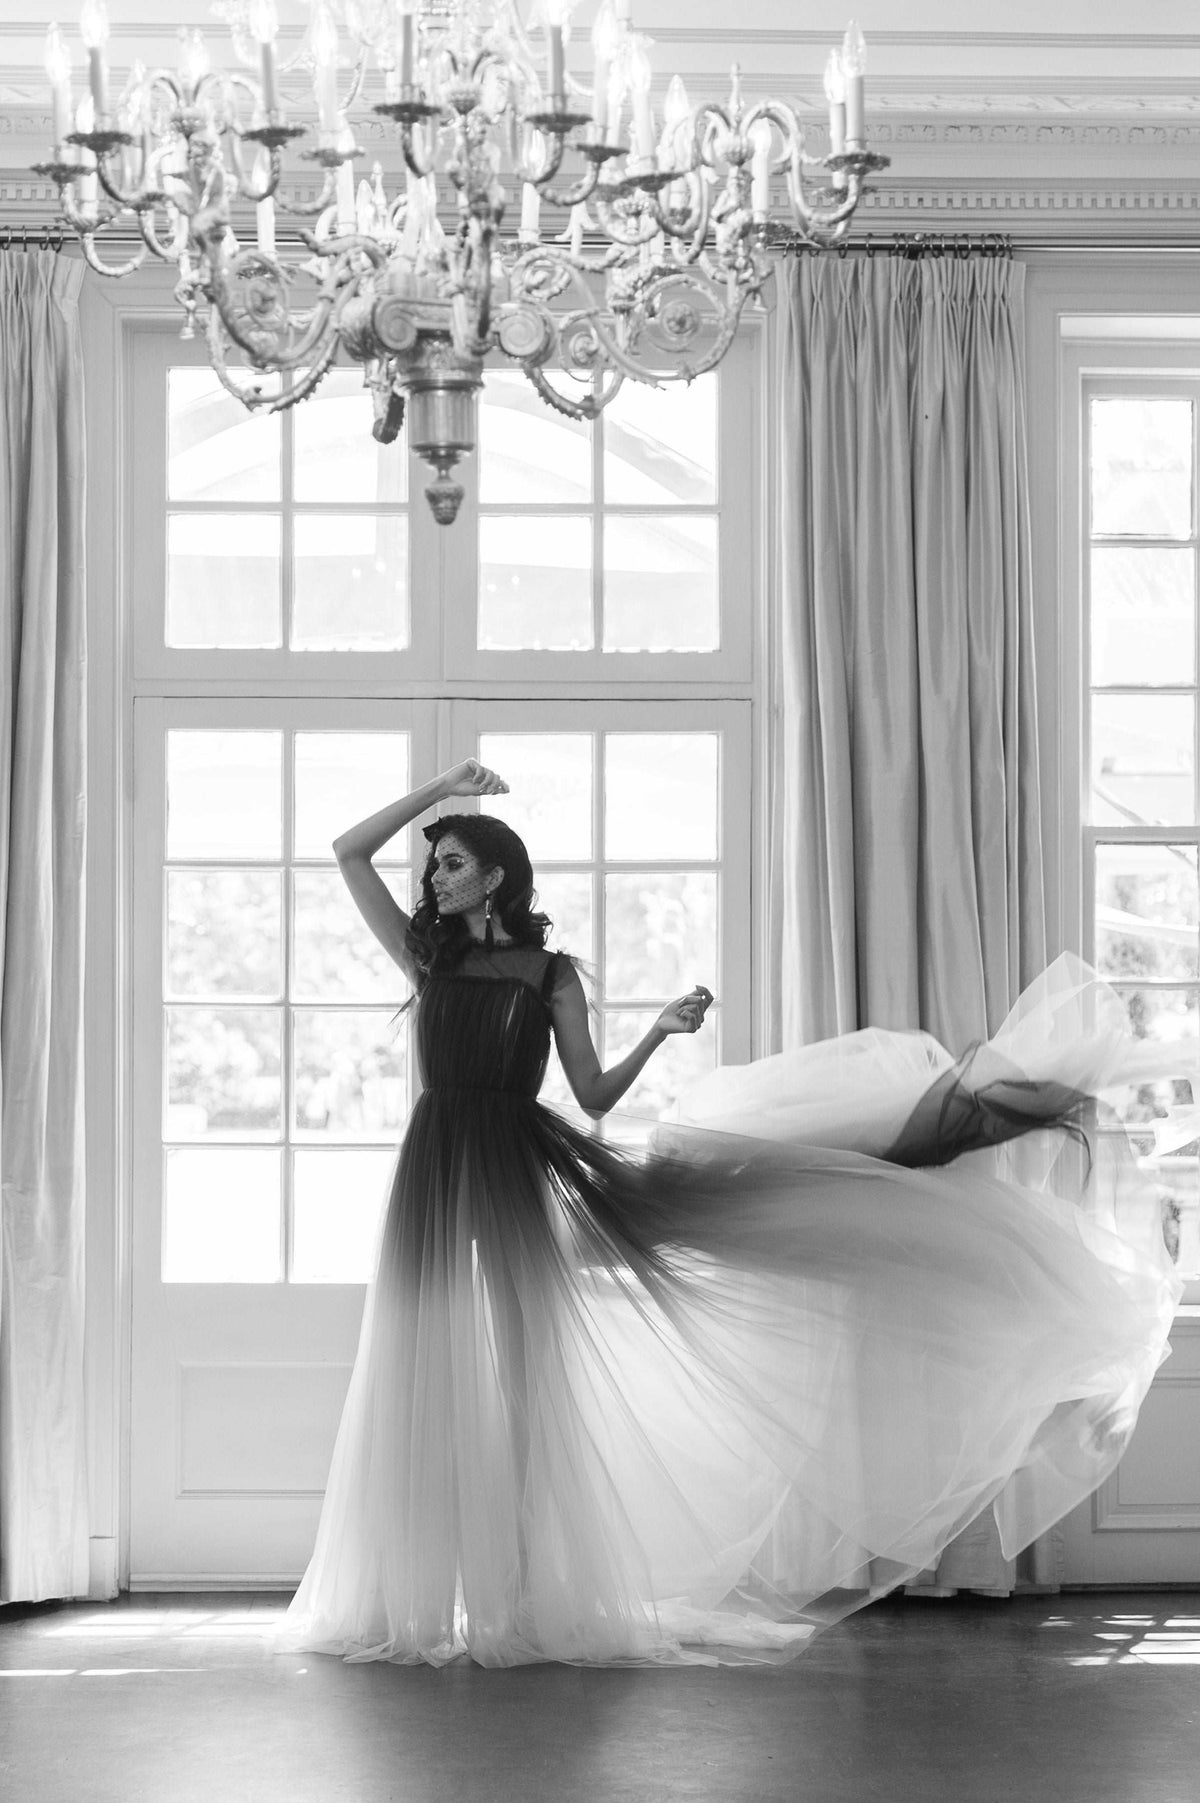 Dramatic ombre black to blush wedding dress. Perfect for the an alternative bride. Available made to order, rent or sample sale. Size 4 US. Catherine Langlois Bridal, Toronto, Canada.